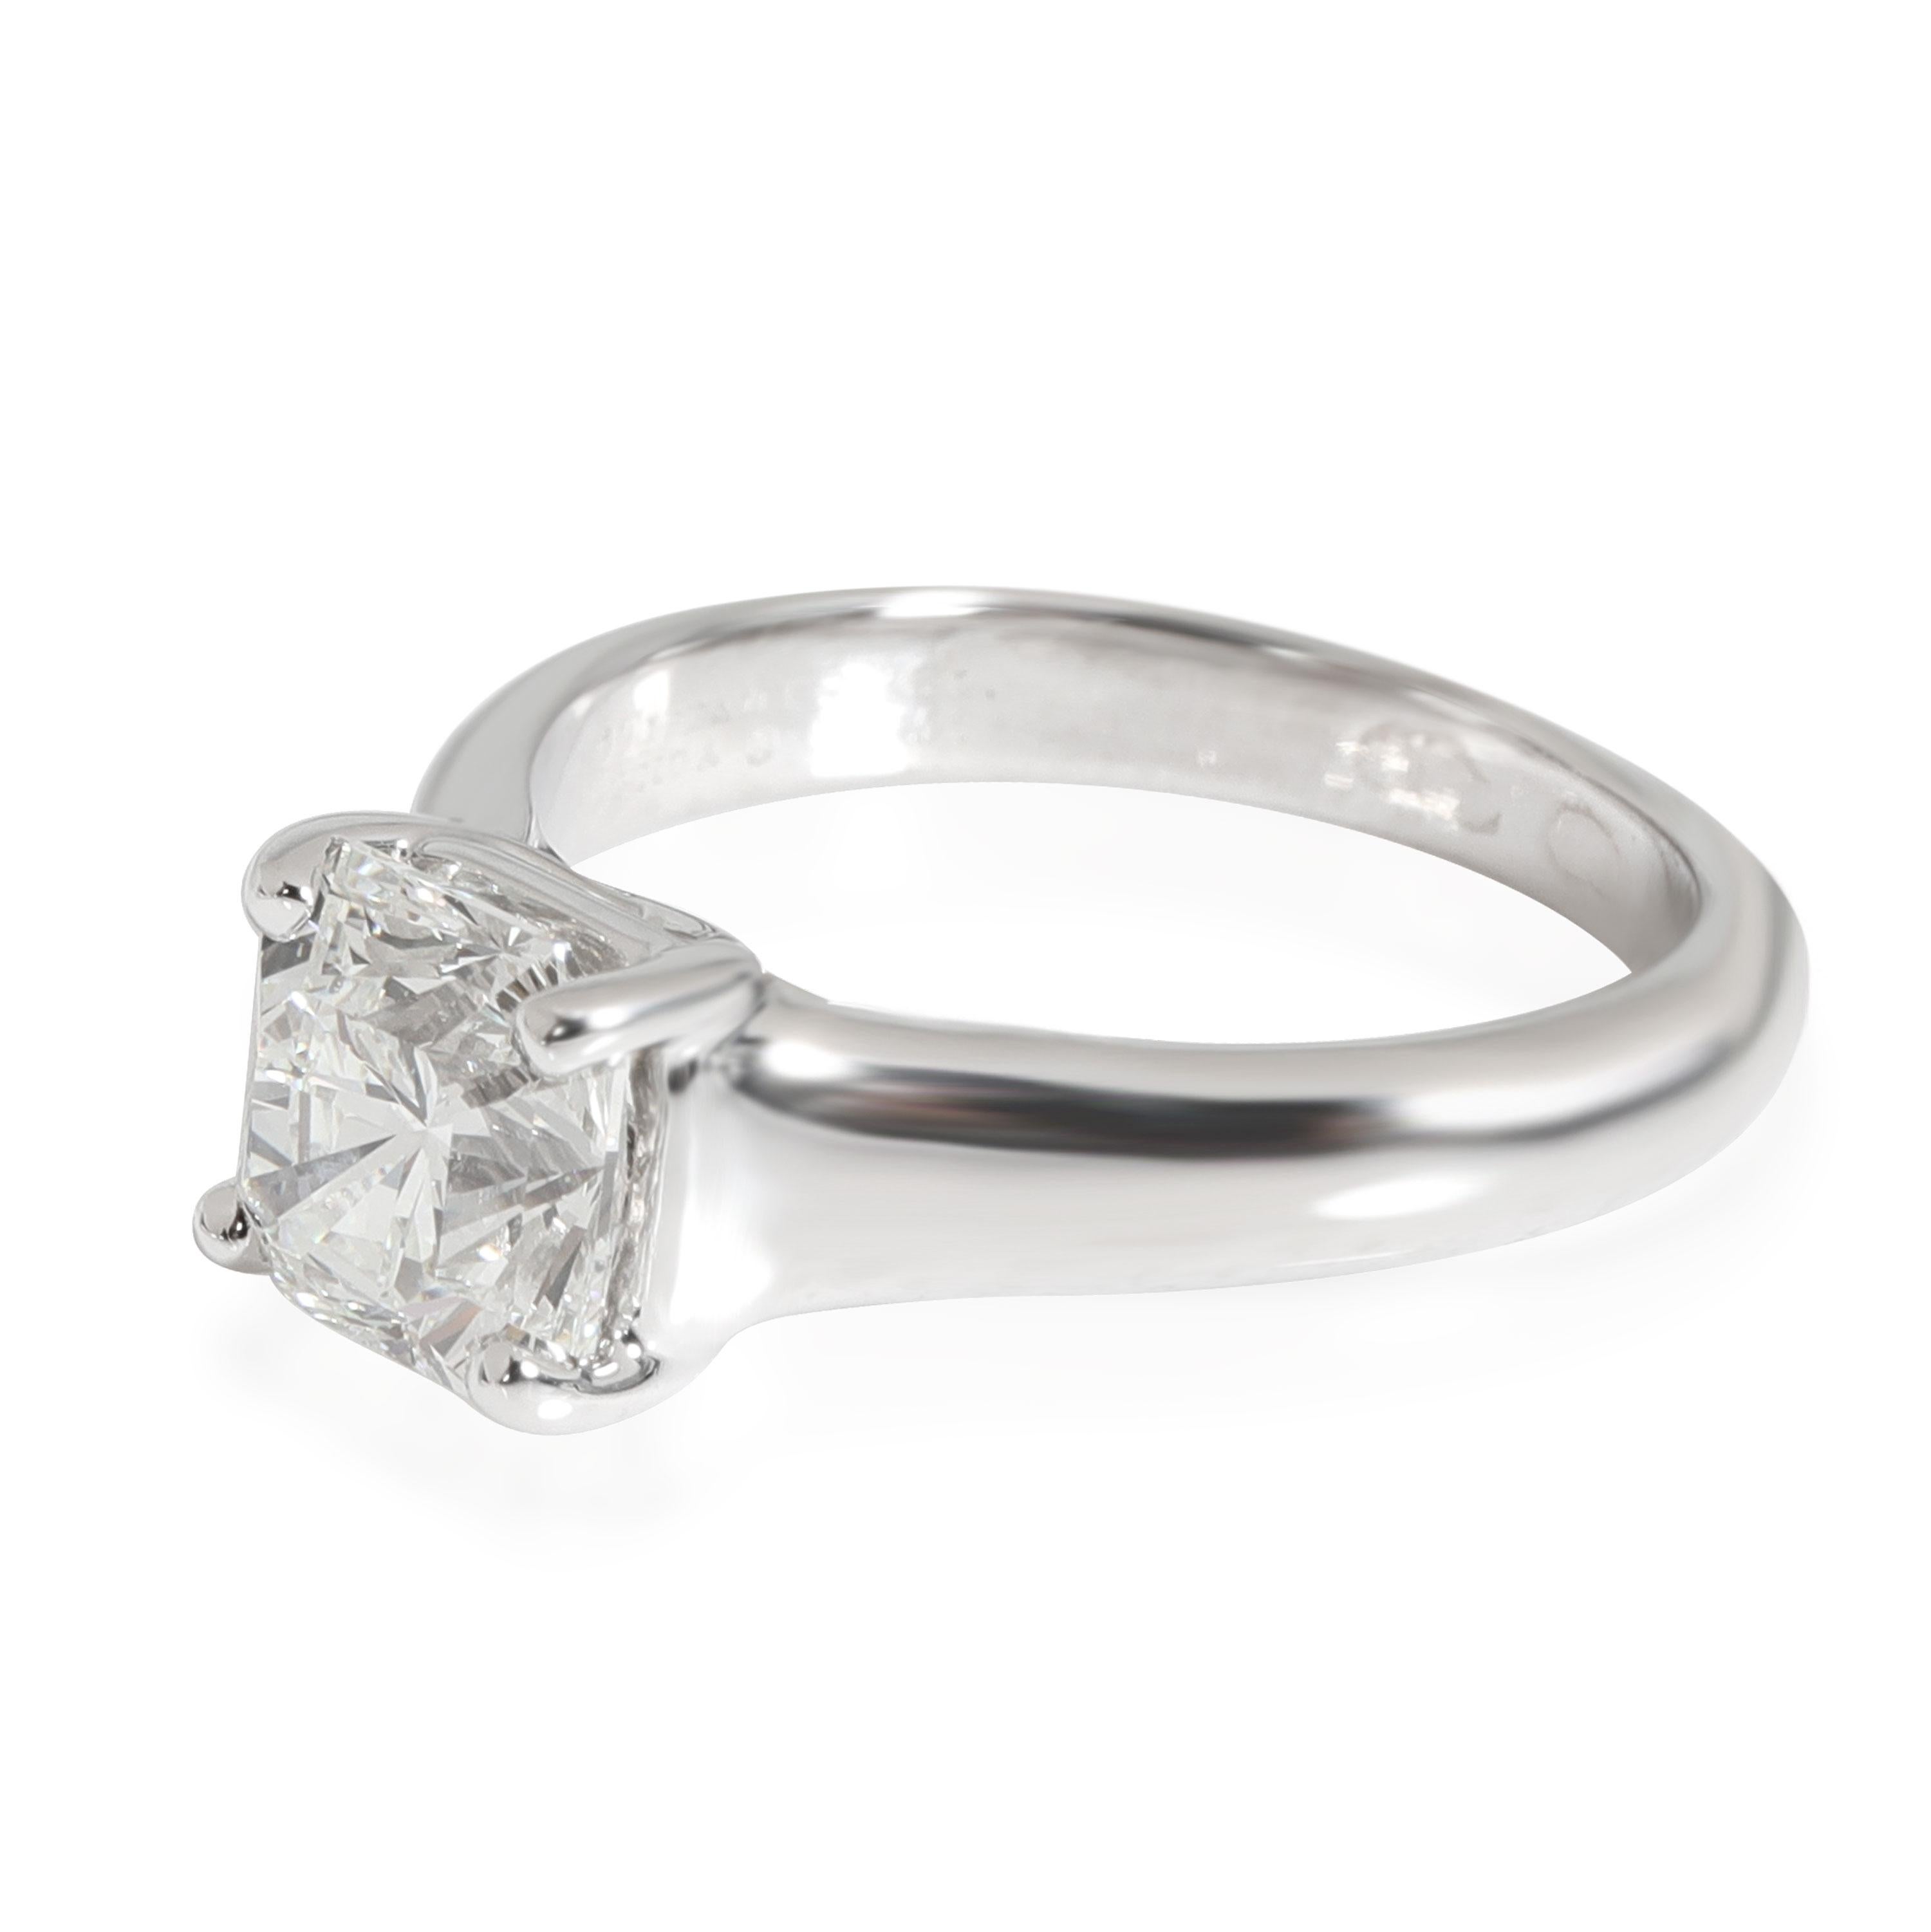 Tiffany & Co. Lucida Diamond Engagement Ring in Platinum H VS2 1.71 CTW

PRIMARY DETAILS
SKU: 115409
Listing Title: Tiffany & Co. Lucida Diamond Engagement Ring in Platinum H VS2 1.71 CTW
Condition Description: Retails for 35,400 USD. In excellent